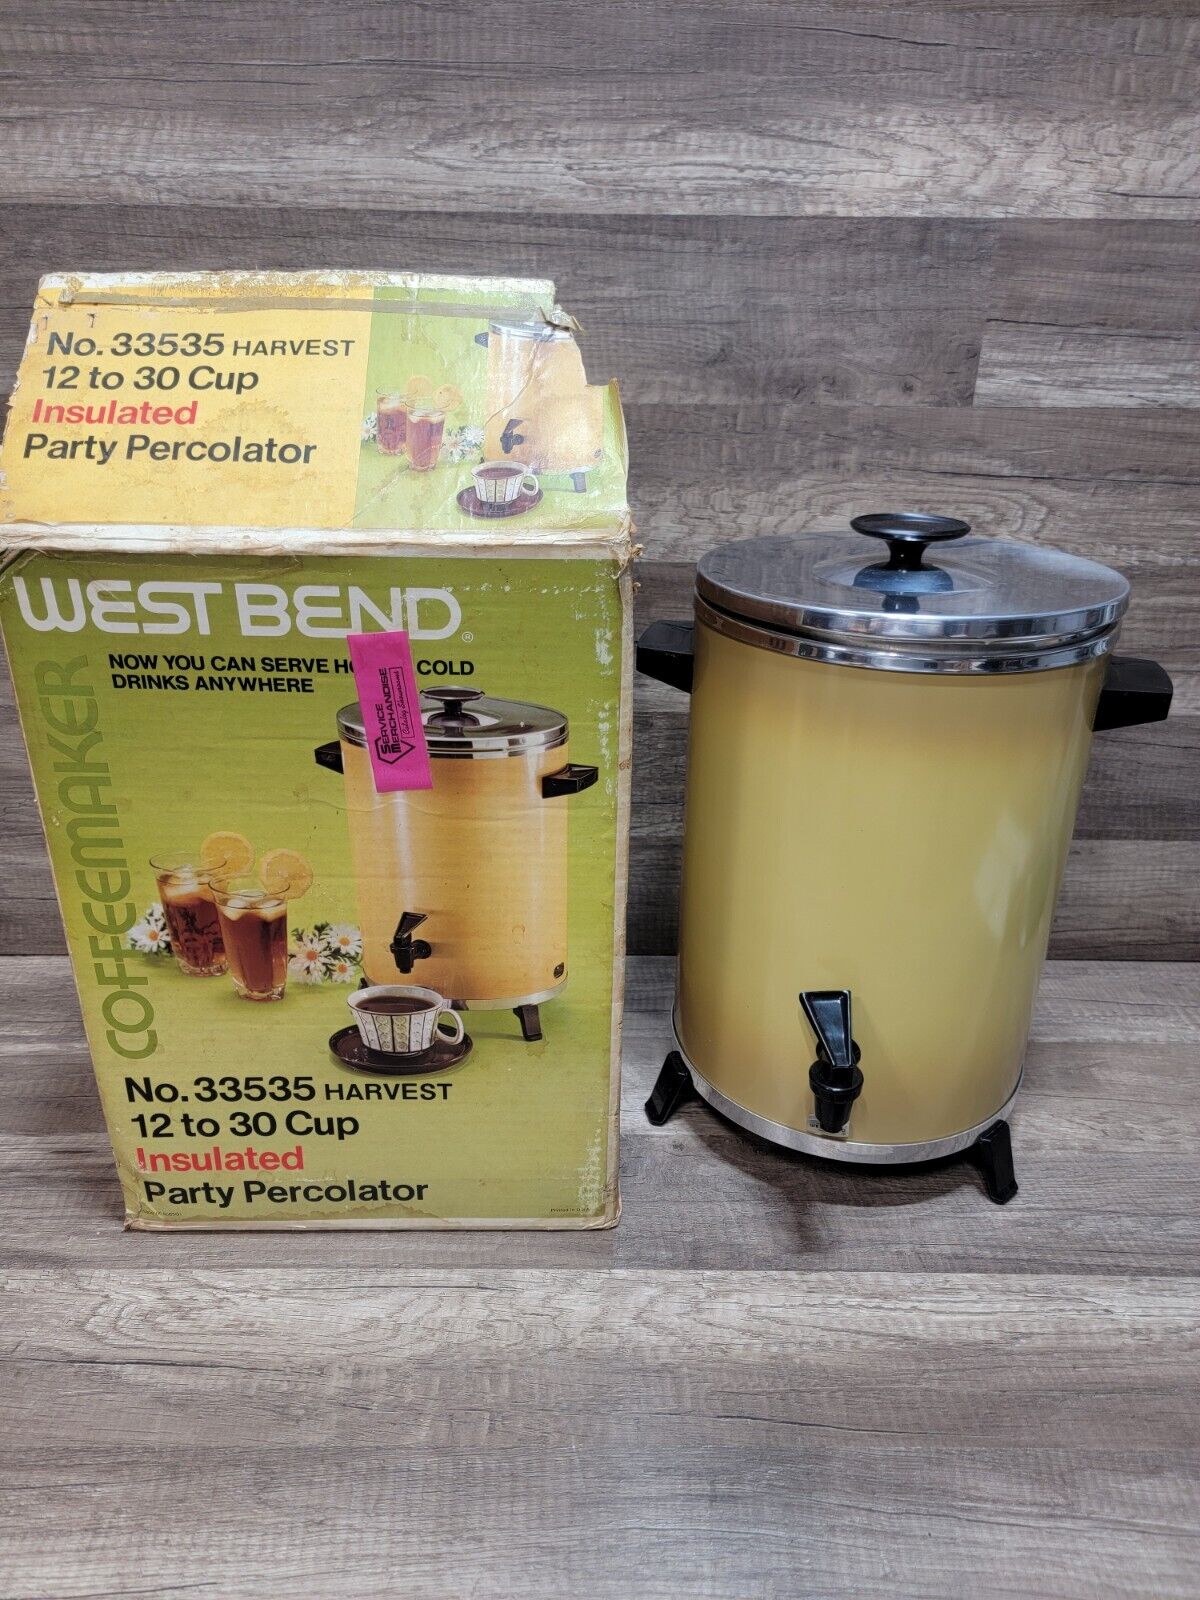 CLEAN West Bend 30 Cup Party Percolator Coffee Maker 33535 1976